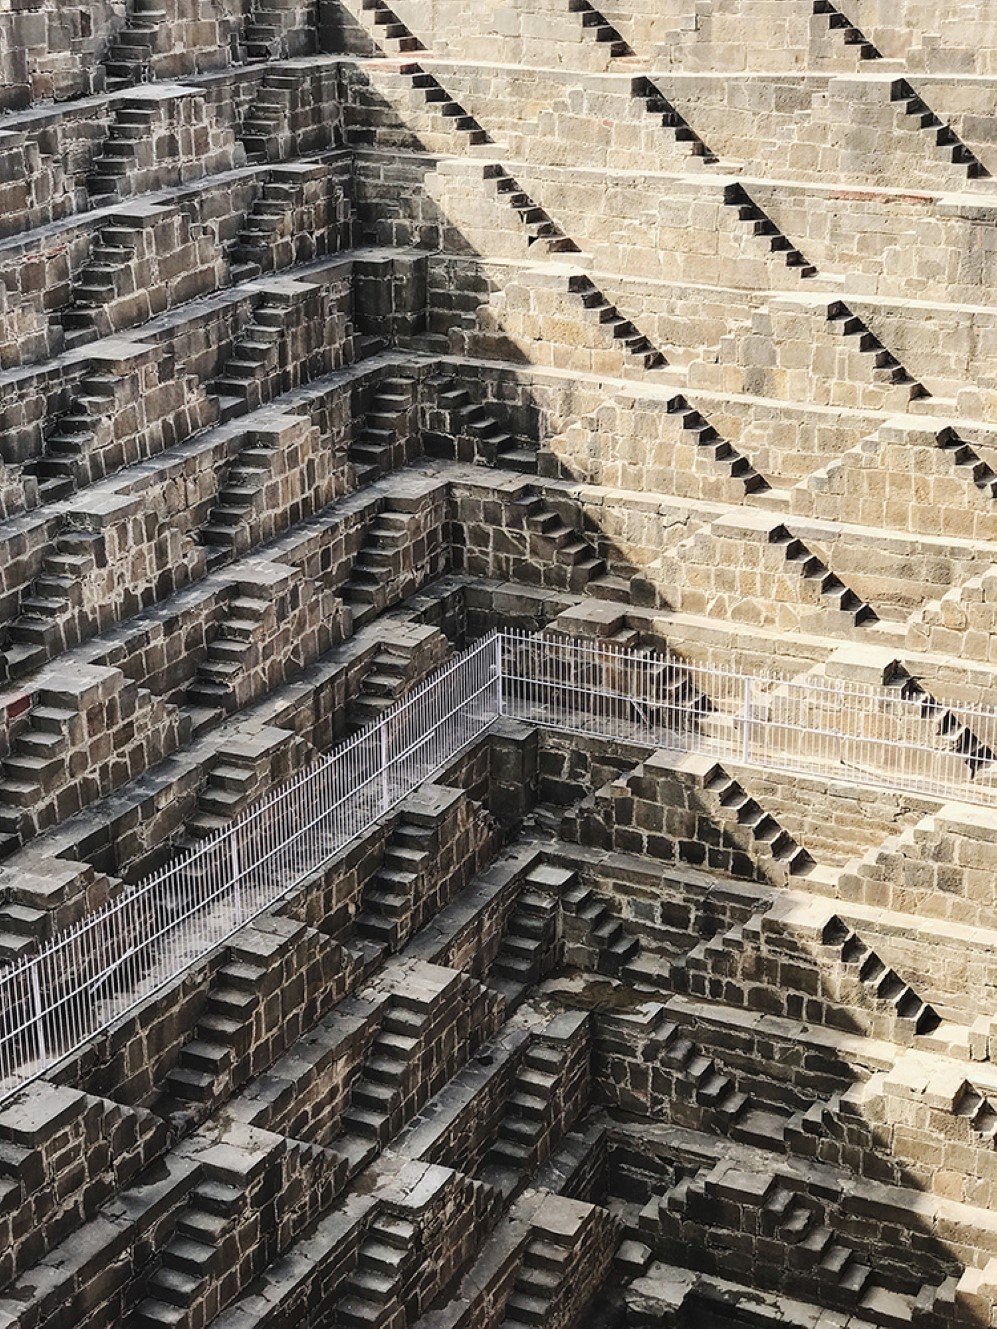 This photo was taken when I was traveling in India. Chand Baori consists of 3,500 narrow steps over 13 storeys. It extends approximately 30 meters into the ground making it one of the deepest and largest stepwells in India. I marveled these elegant stepwells and shadows, I immediately took out my camera and captured this beautiful scene before it was gone.